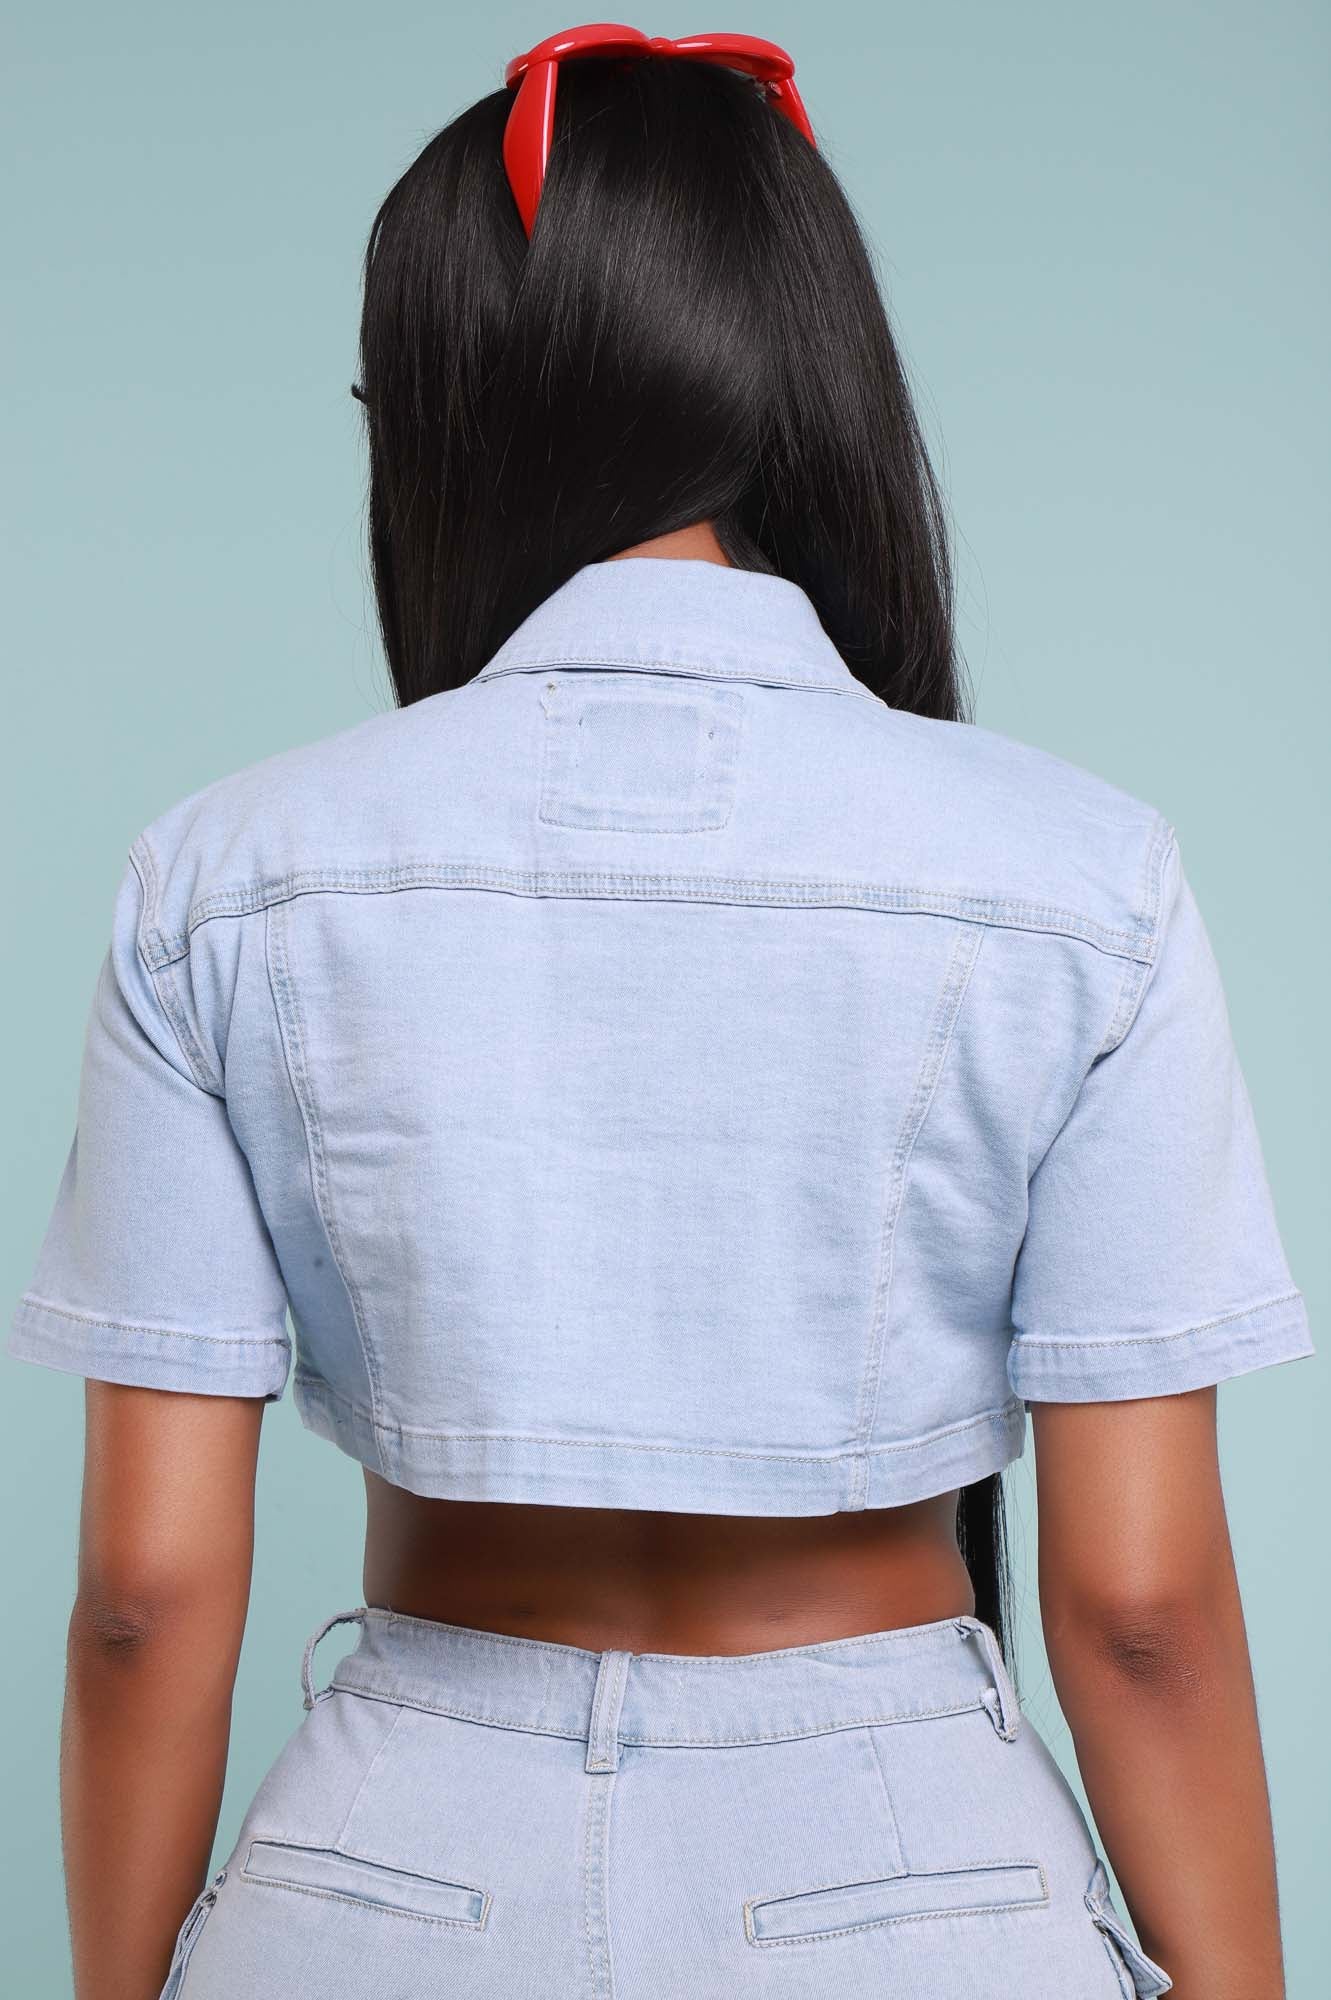 A Short Sleeve Denim Jacket is the Best Layering Piece - Posh in